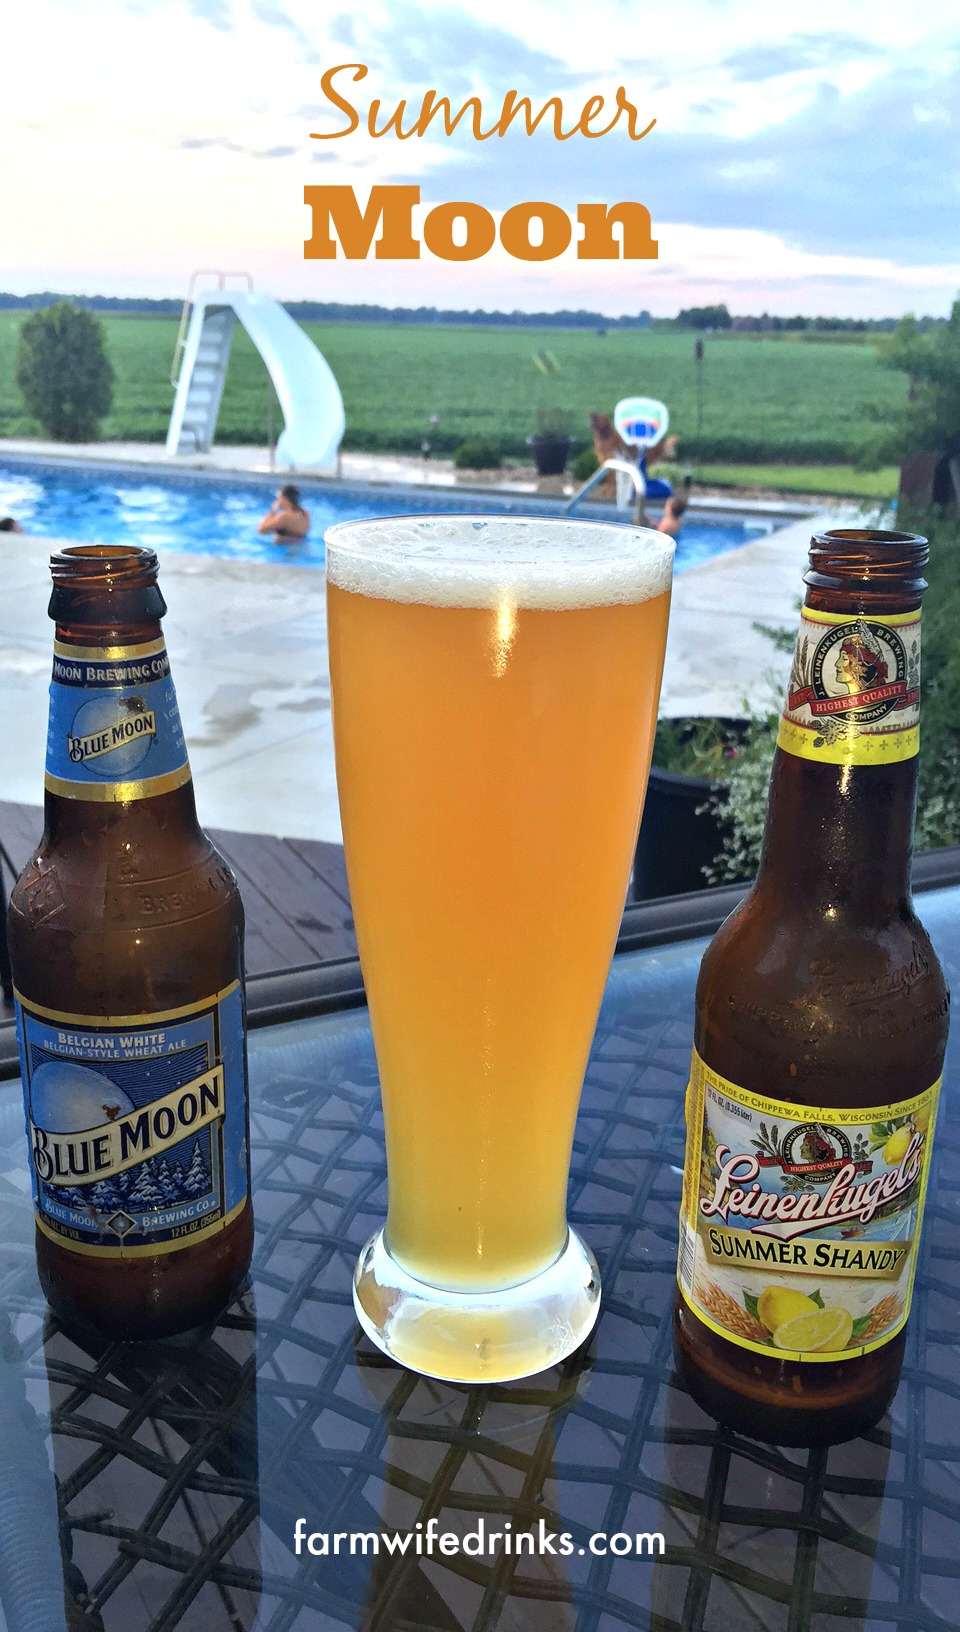 The summer moon beer recipe combines two great citrus beers for the perfect summer beer cocktail.